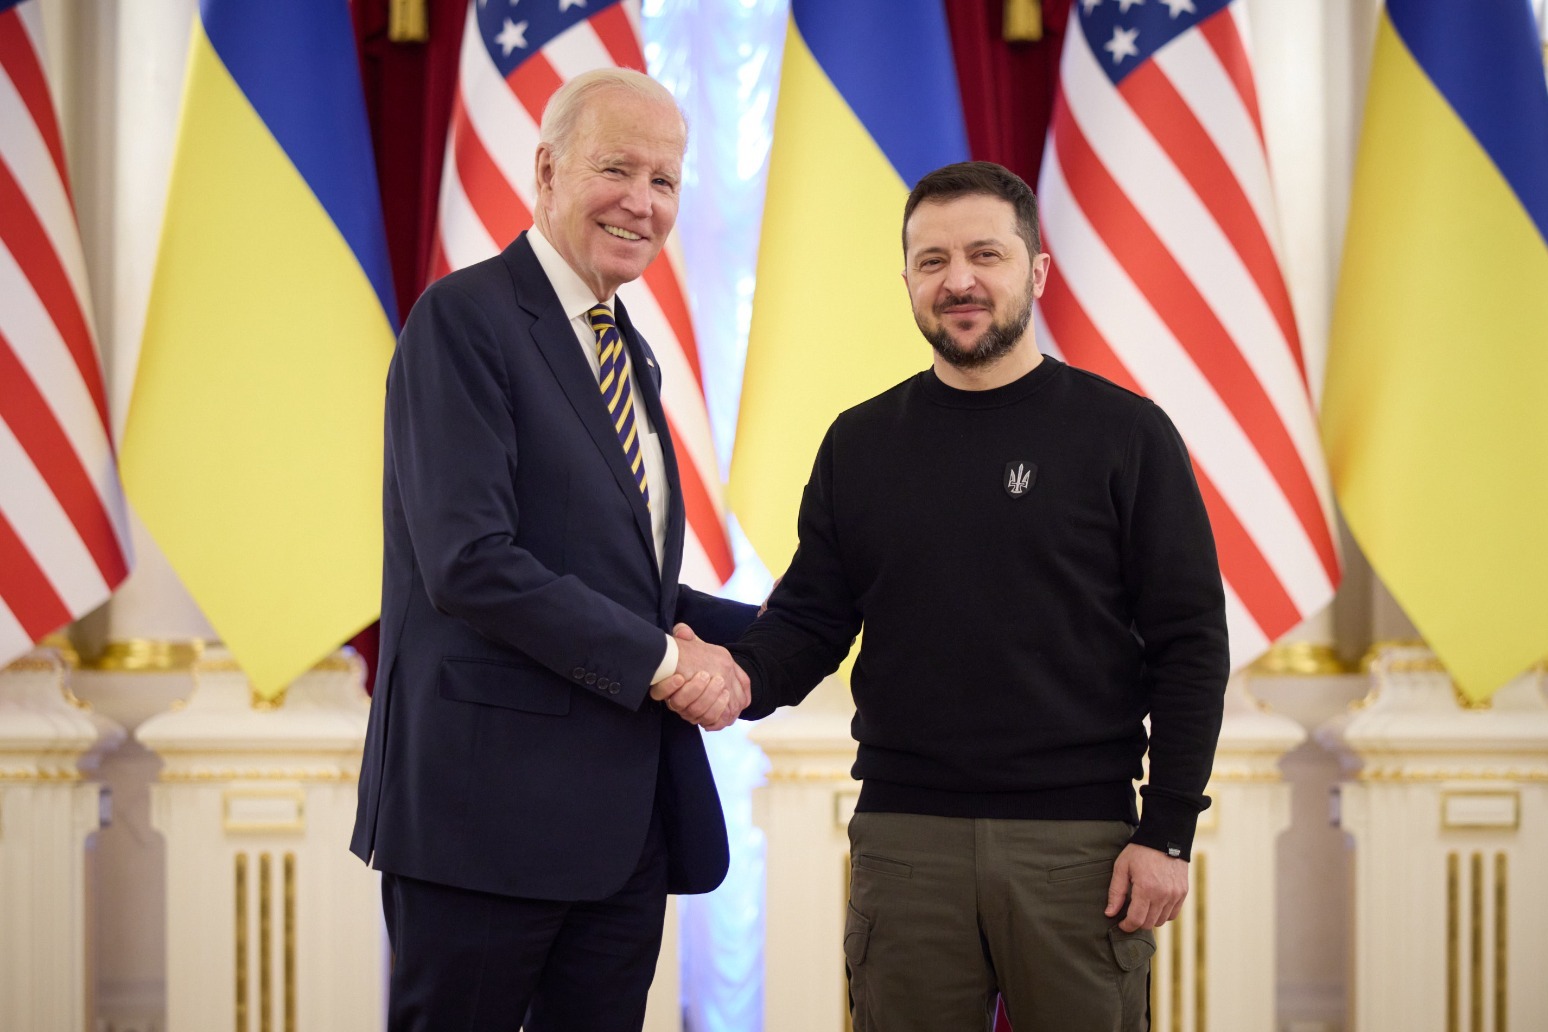 Biden visits Kyiv and says ‘democracy stands’ in Ukraine ahead of anniversary 